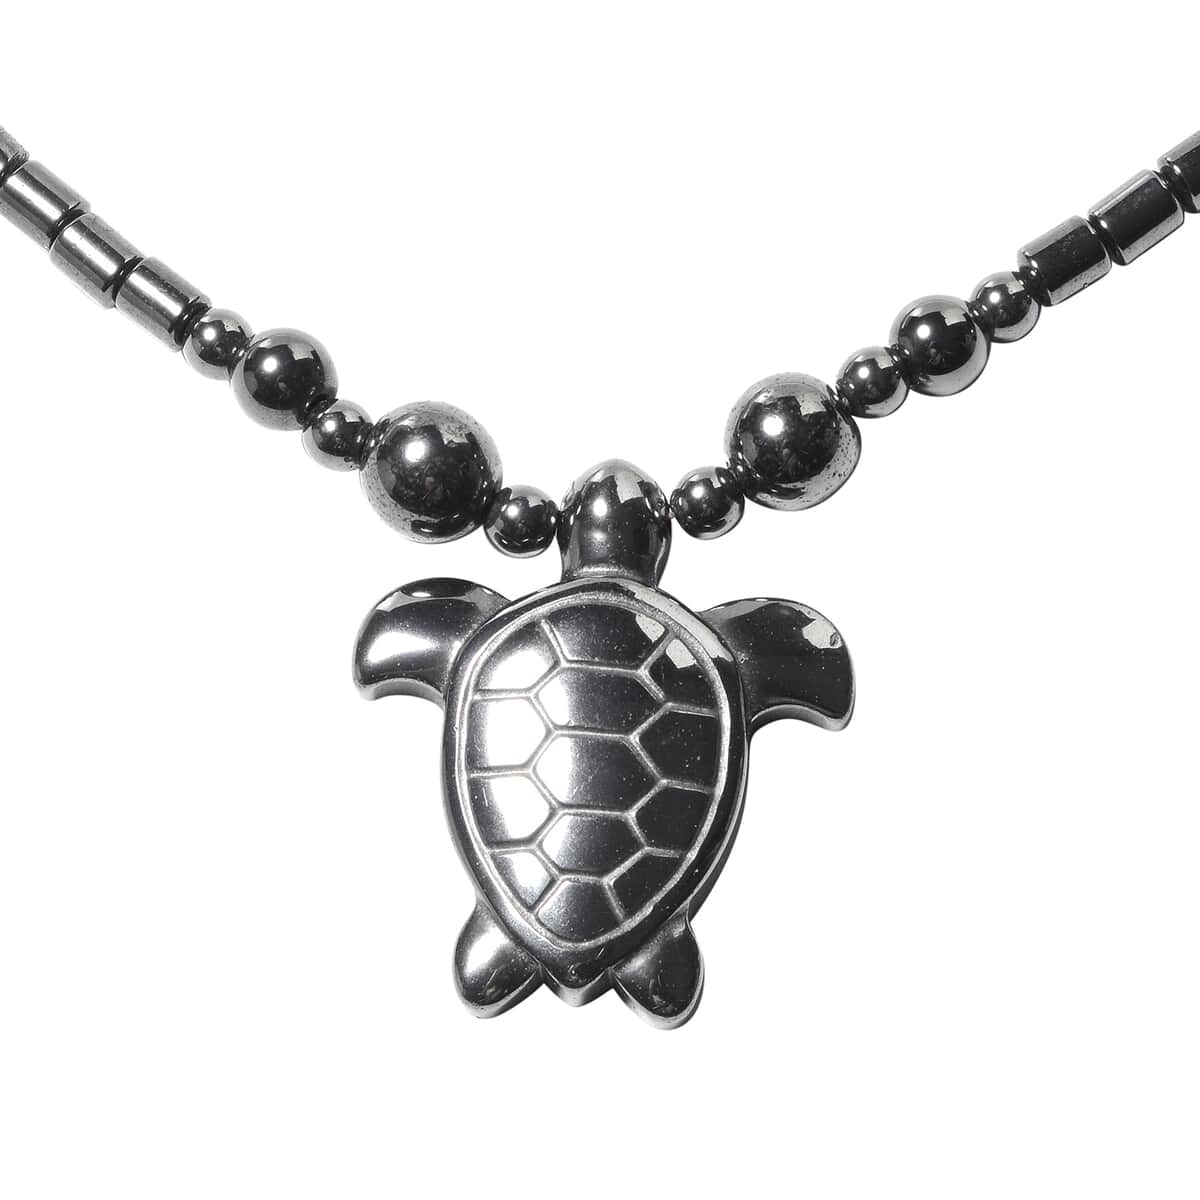 Hematite Beaded Necklace 20 Inches with Turtle Pendant in Stainless Steel image number 2